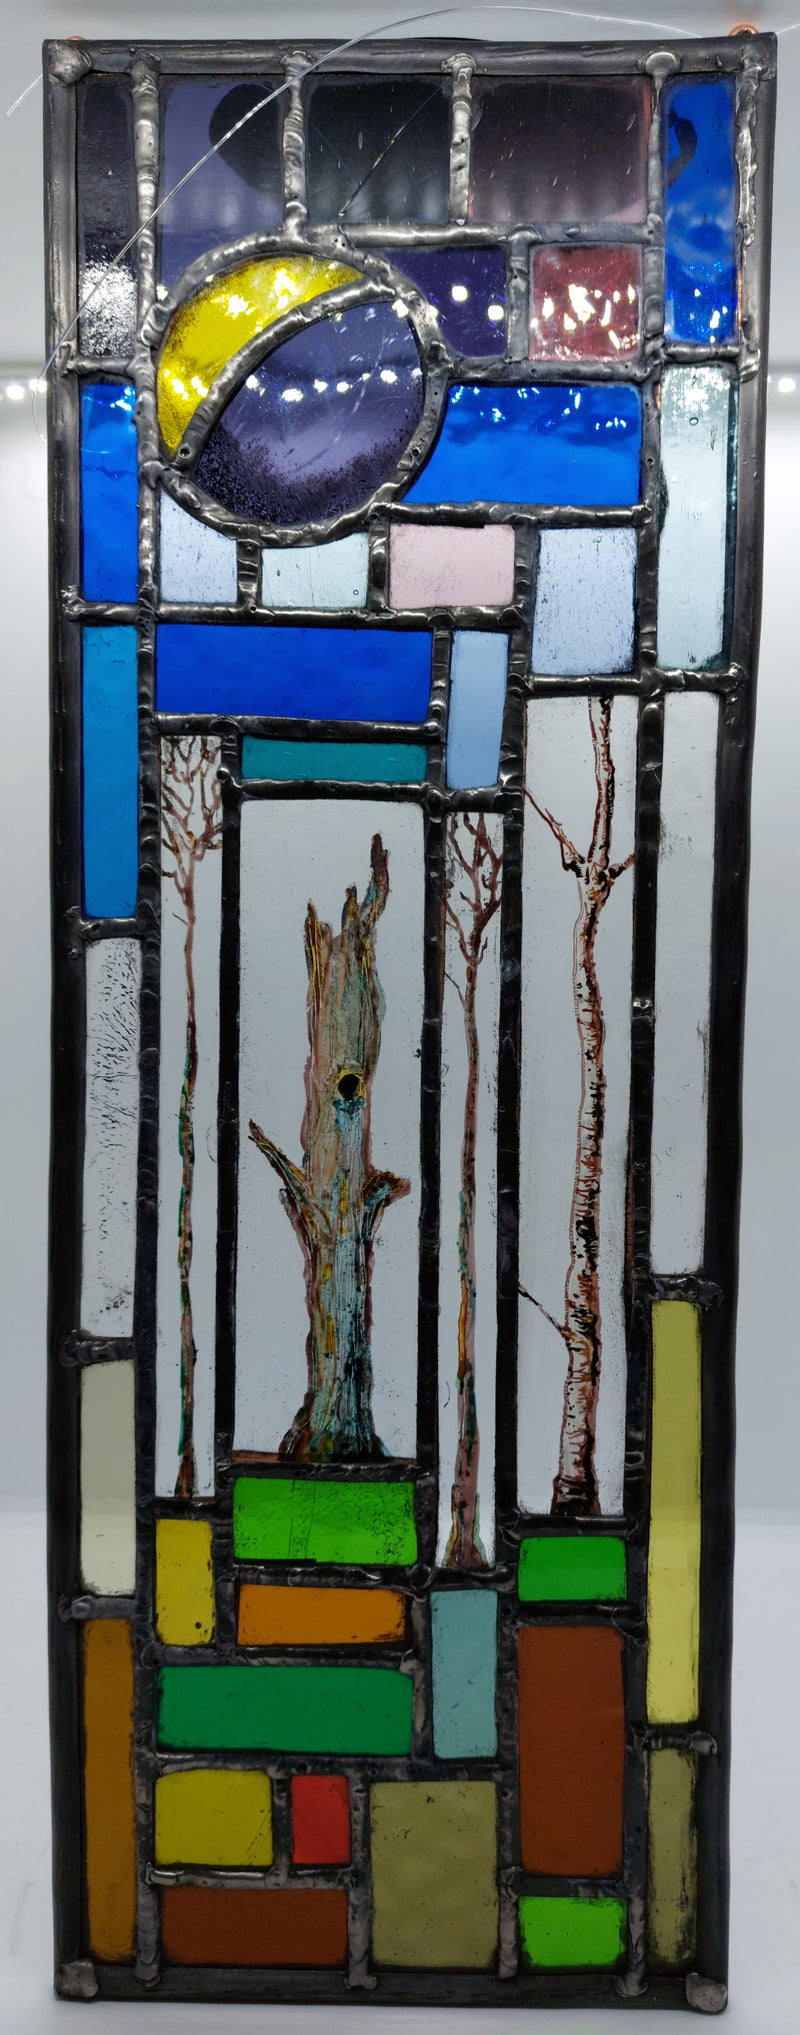 Copse at Night, stained glass by Bryan Smith